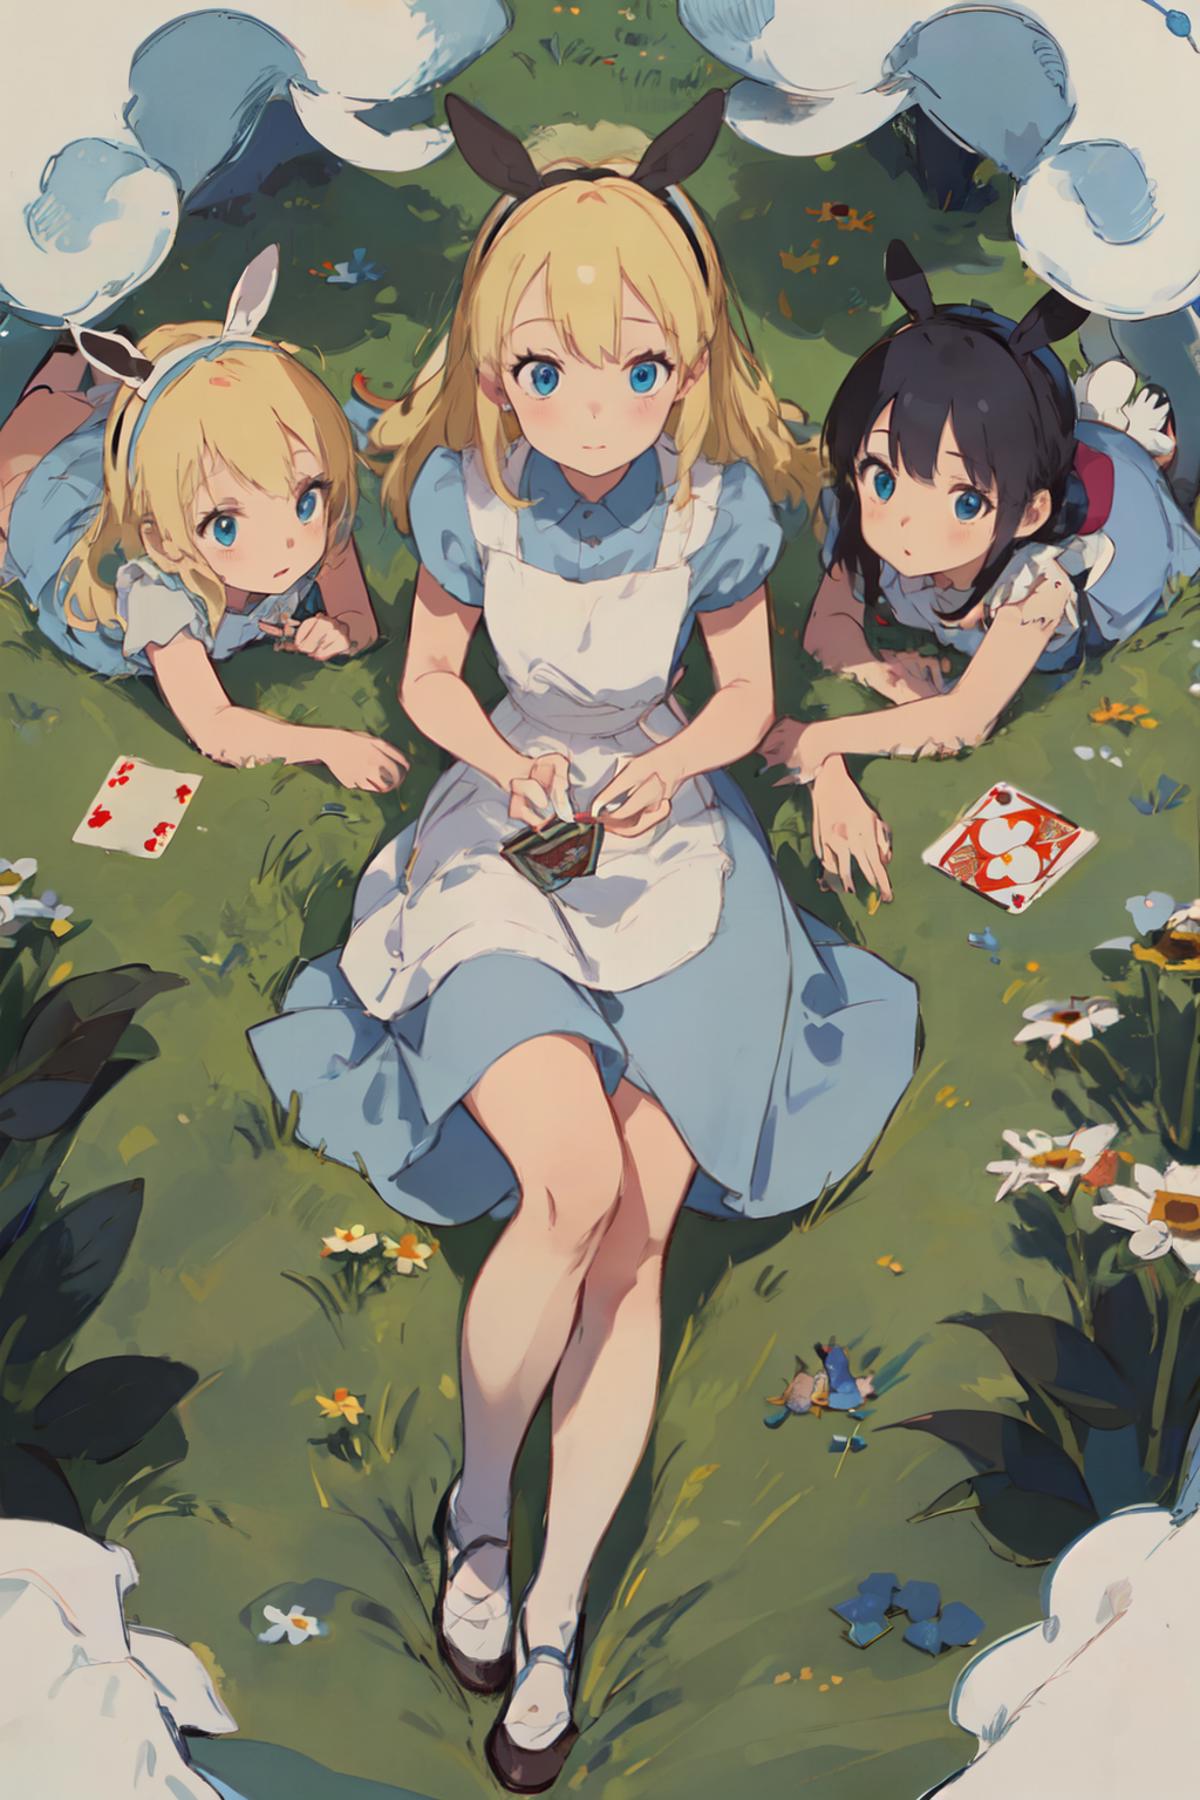 Three cartoon girls, one dressed as Alice in Wonderland, playing with cards on the grass.